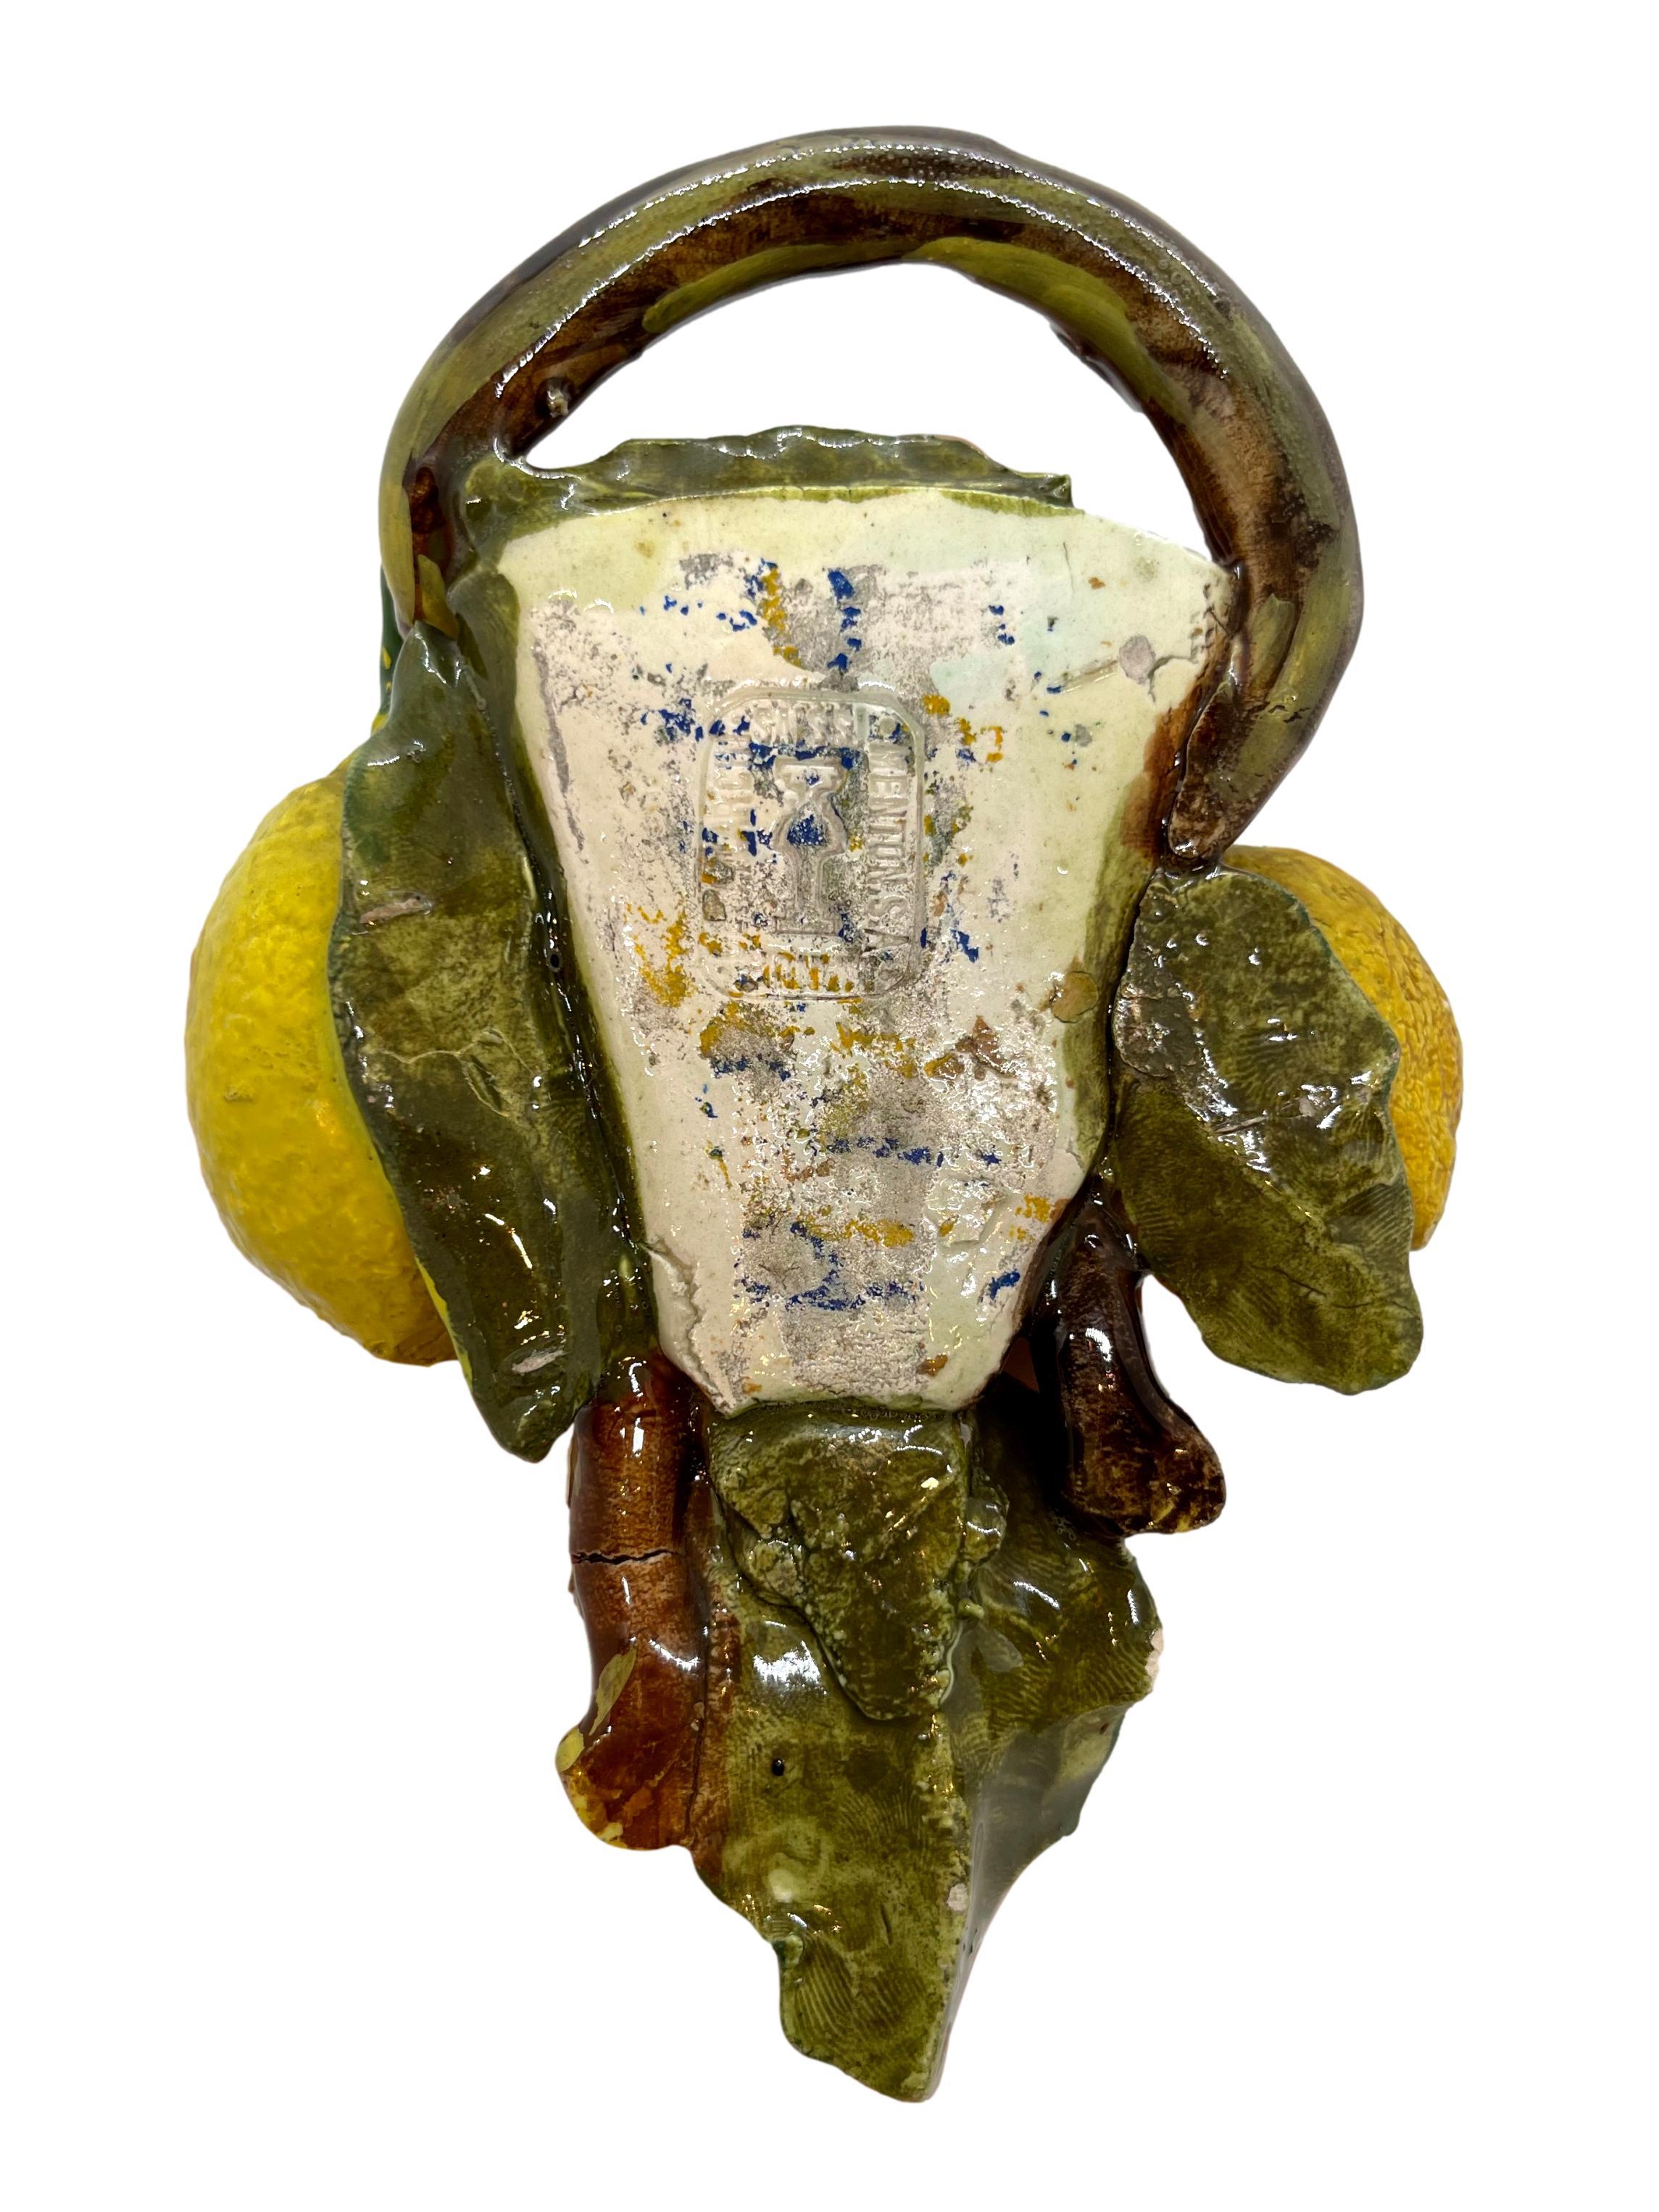 French Majolica Trompe L'oeil Wall Pocket with Lemons by Joseph Saissi, Menton In Good Condition For Sale In Banner Elk, NC